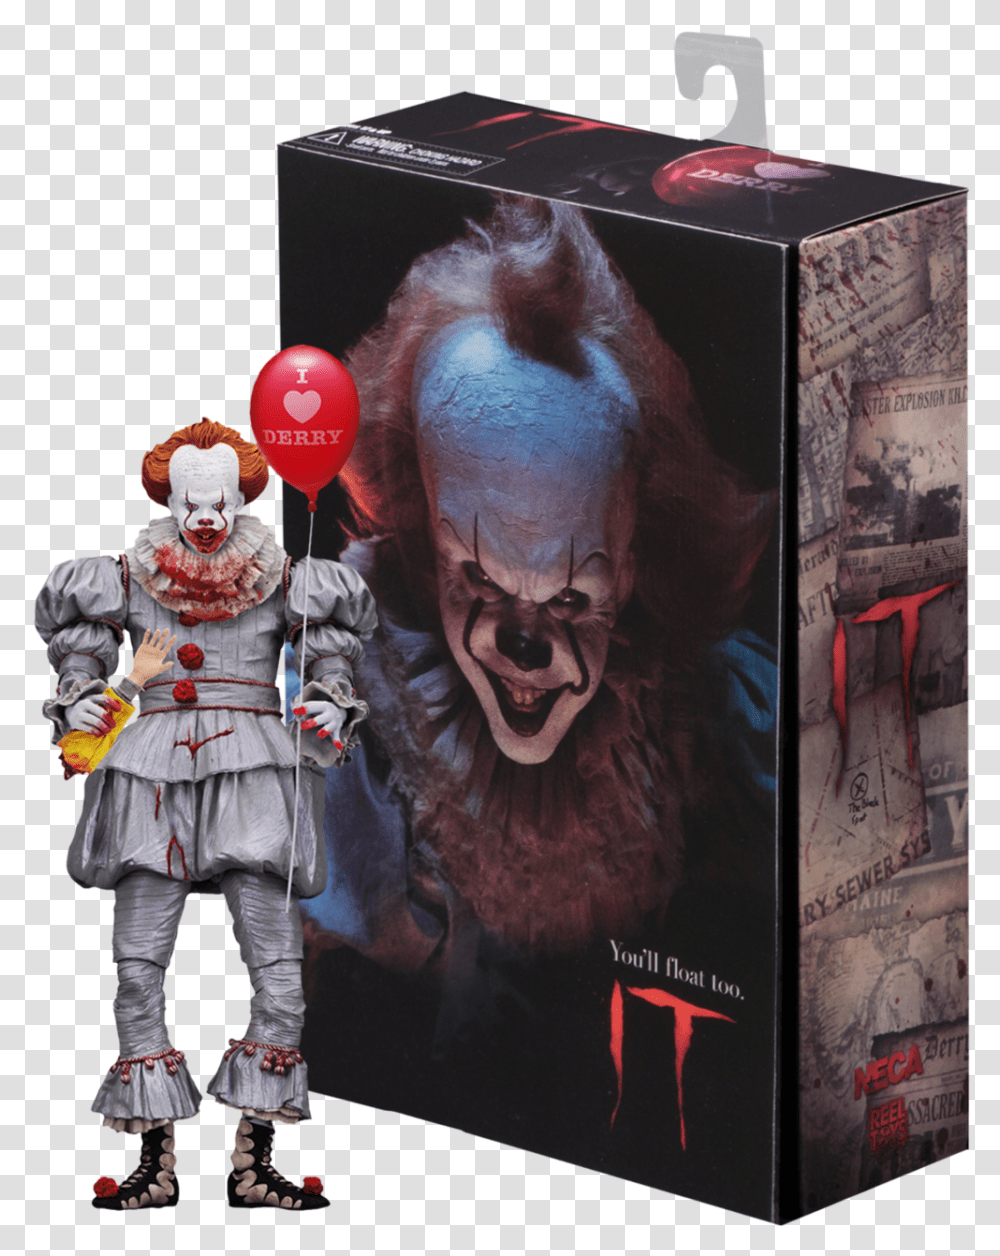 Download It Neca Ultimate Pennywise Image With No Neca Pennywise I Heart Derry, Person, Human, Poster, Advertisement Transparent Png